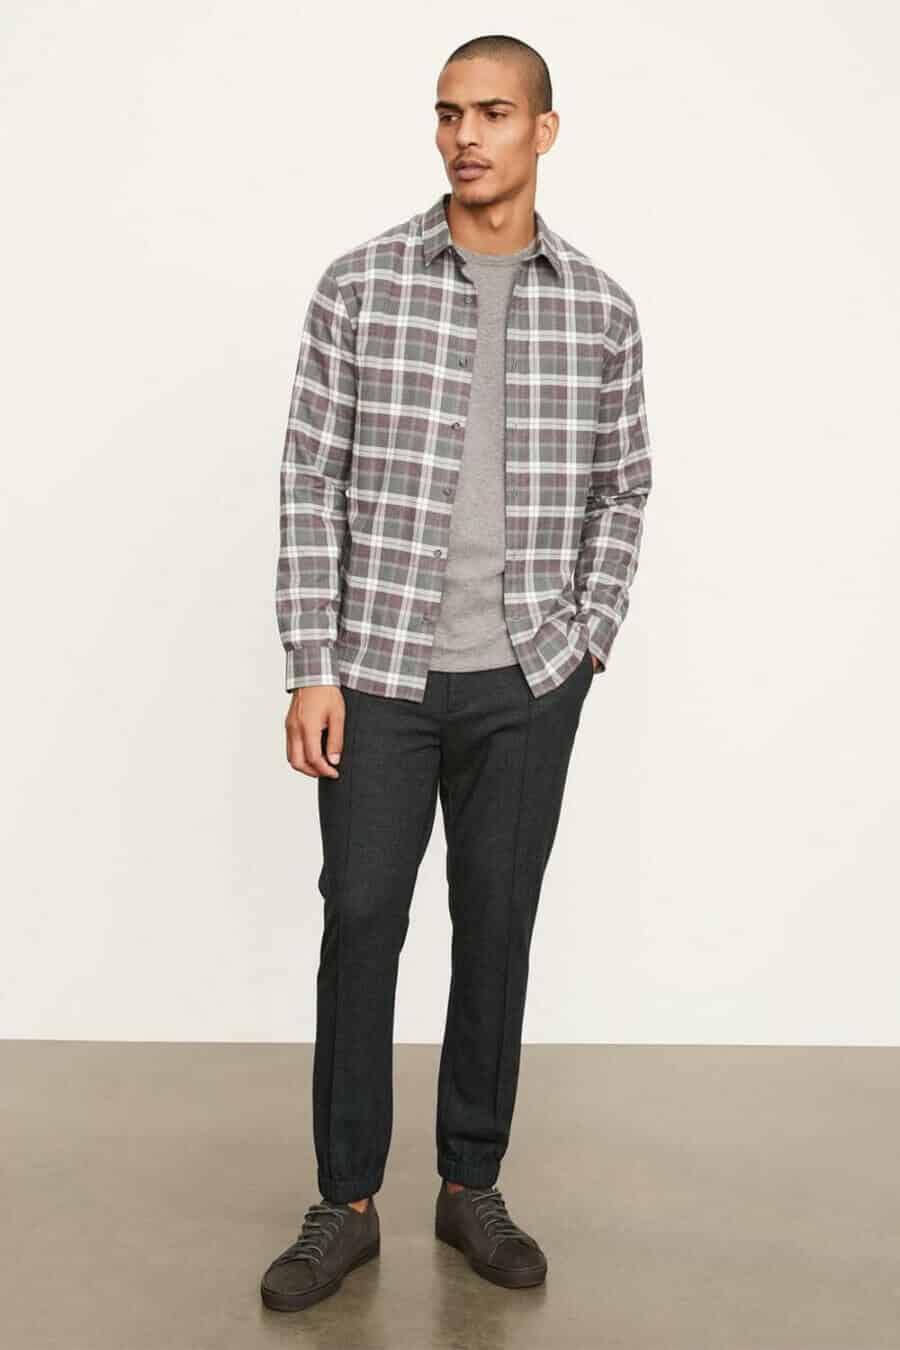 Men's casual flannel shirt outfit